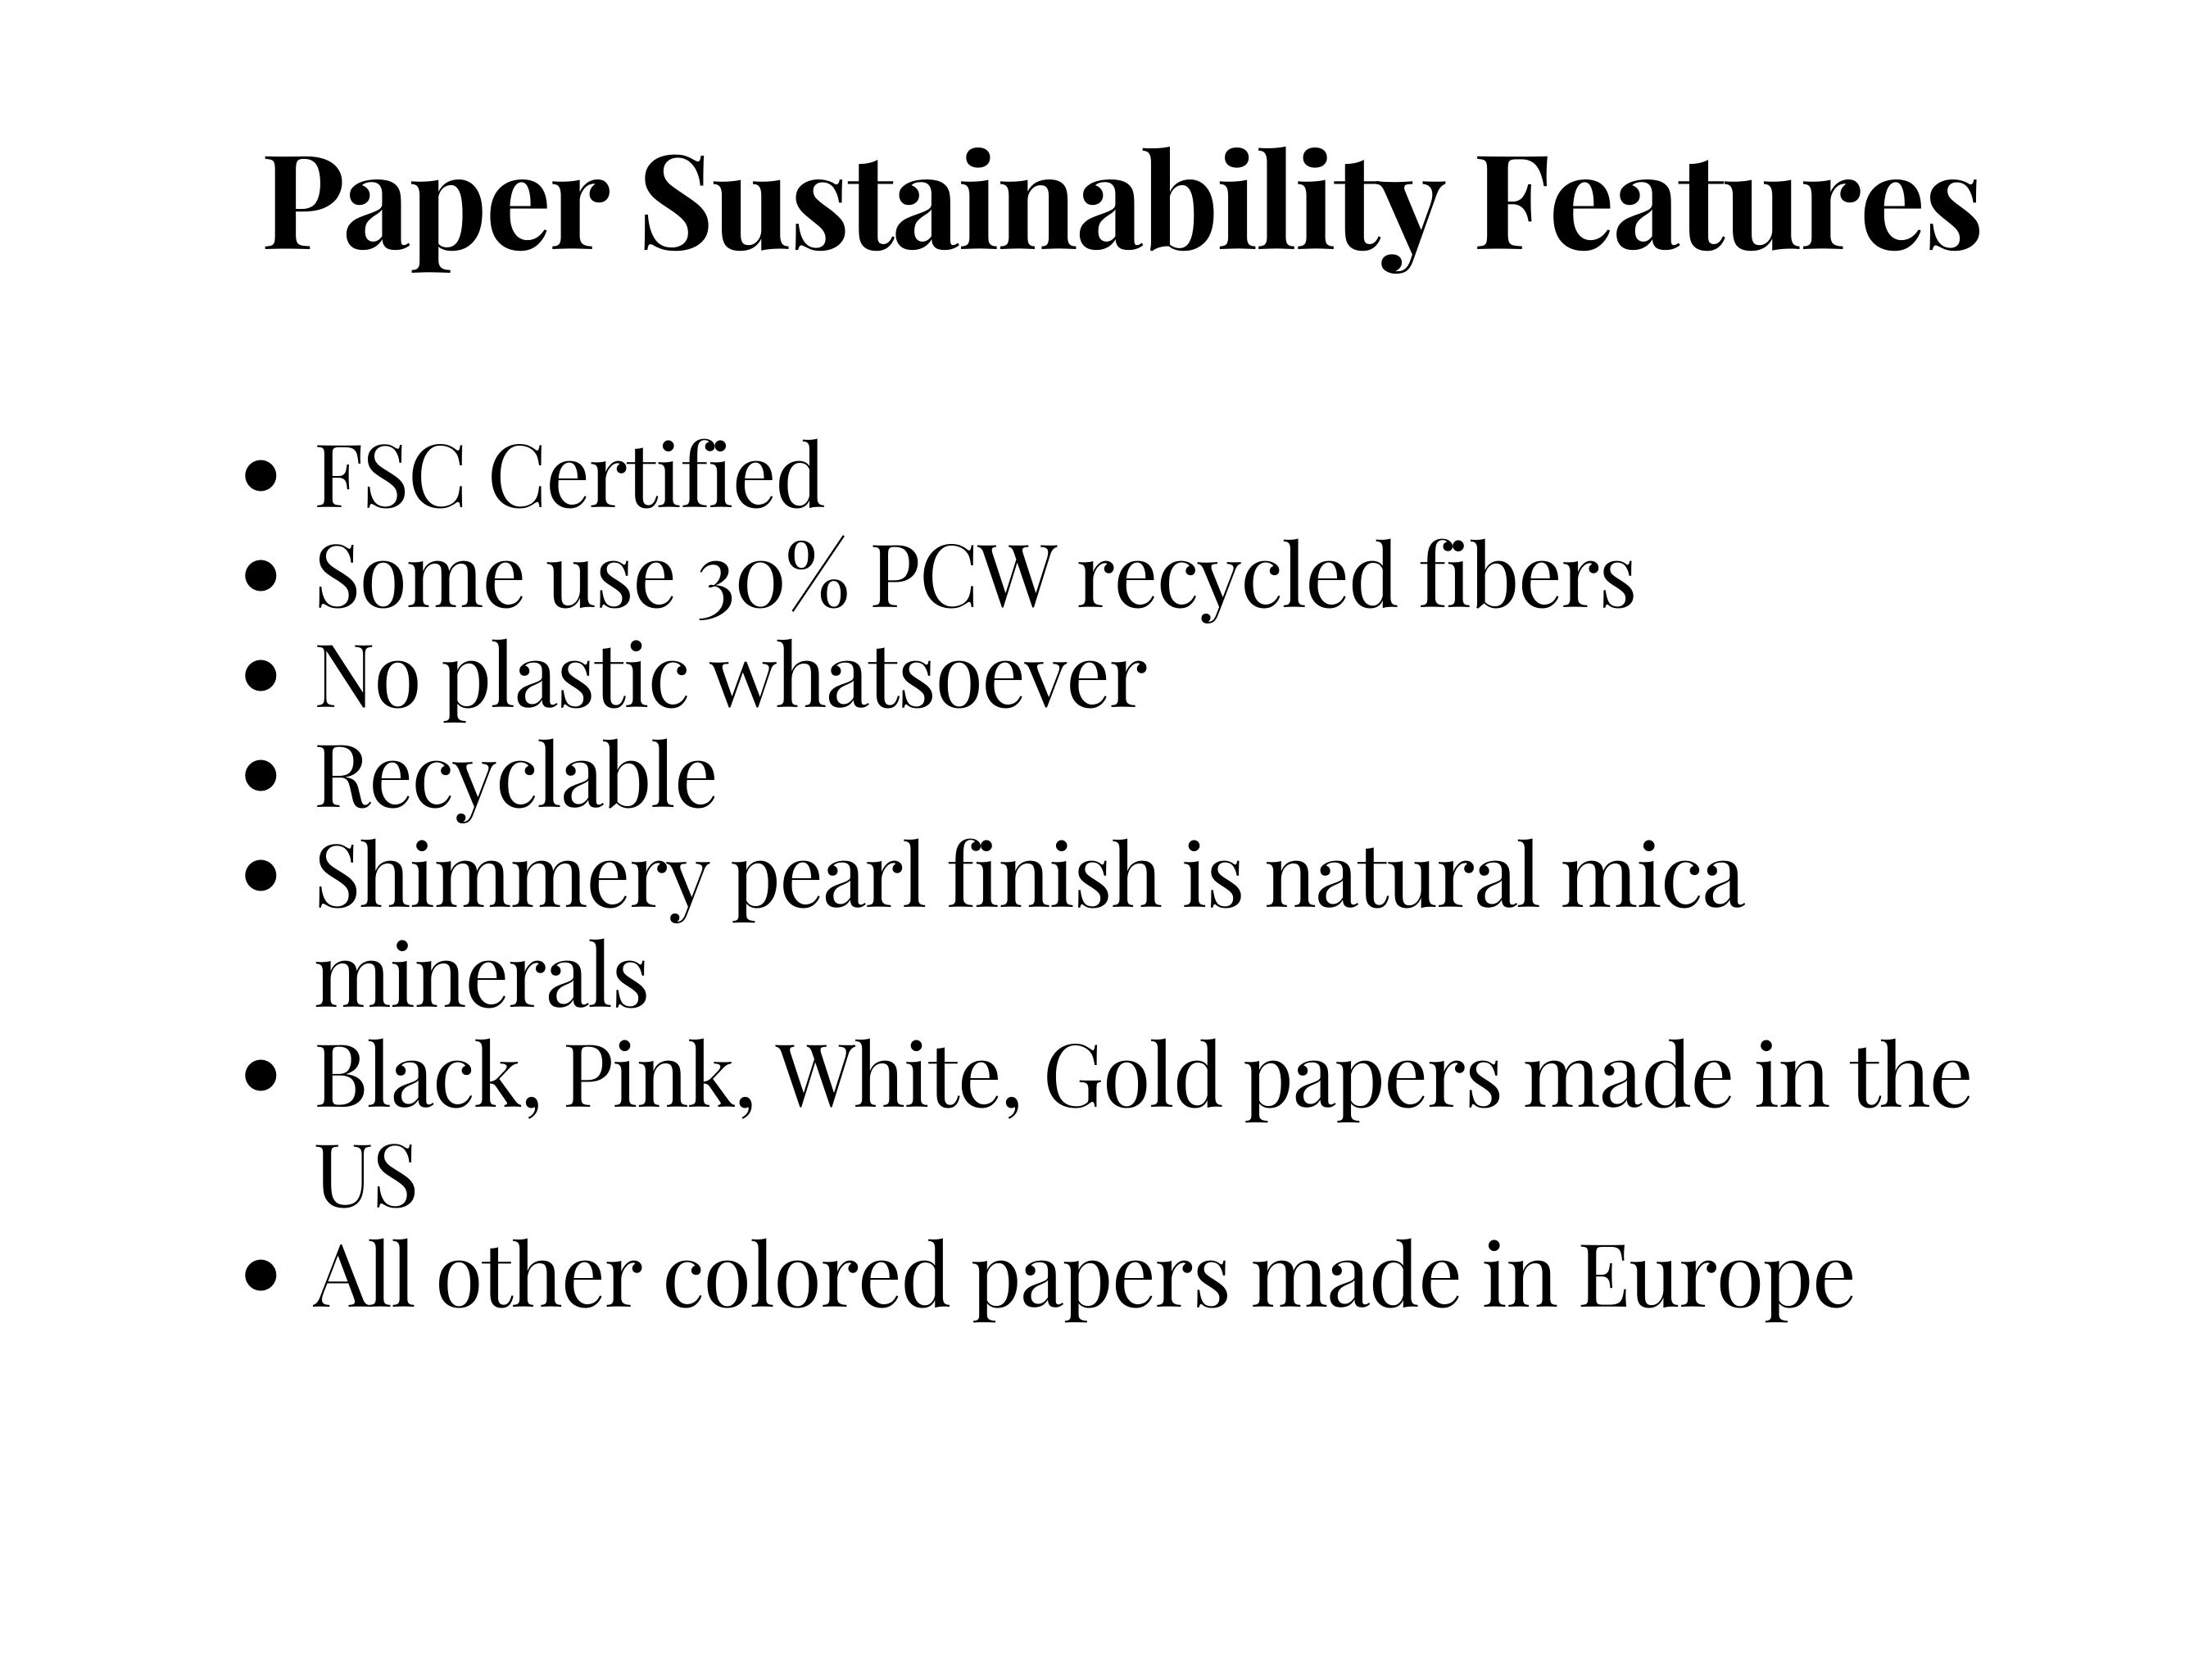 Other Colored Papers